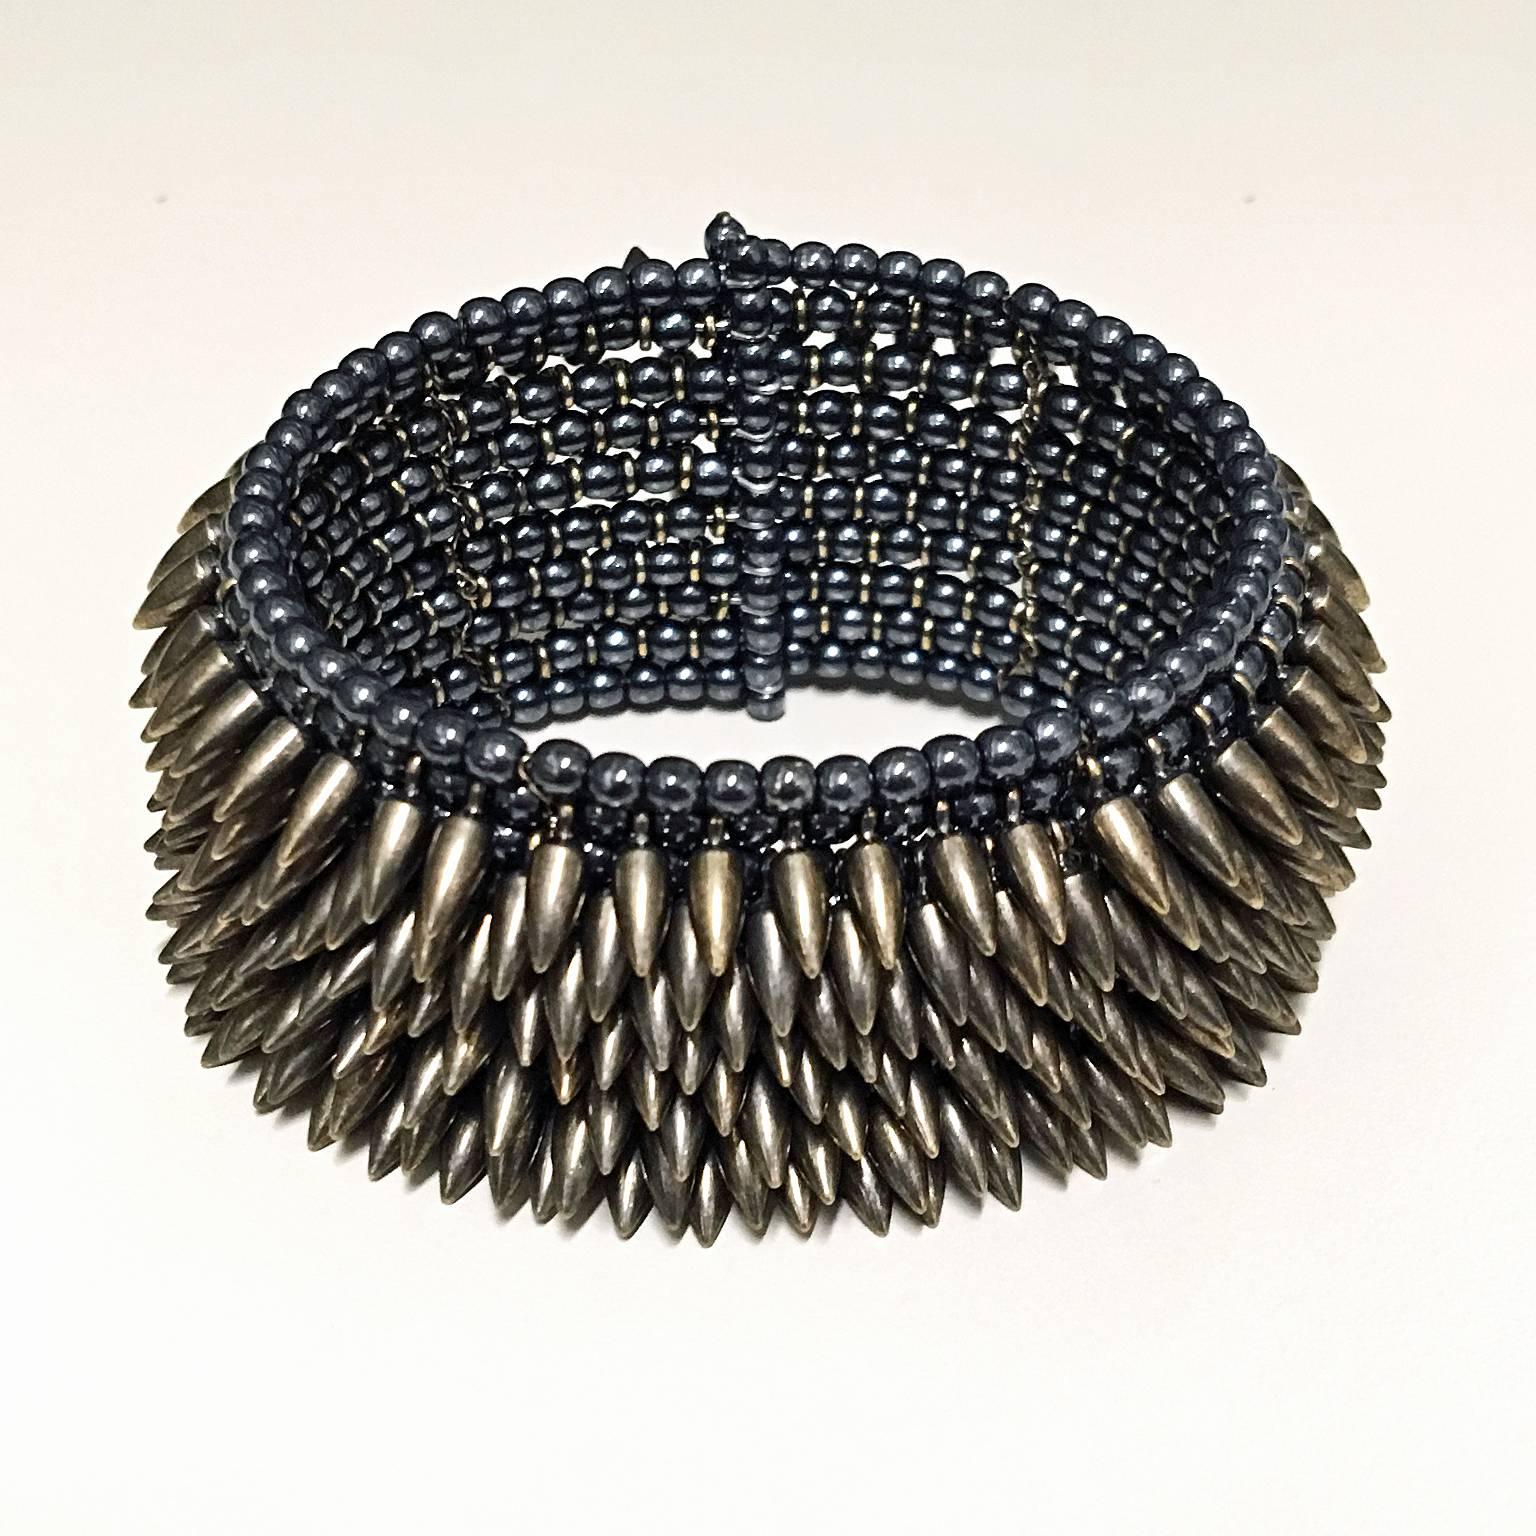 Eight Row Bullet Cuff handcrafted by Estyn Hulbert with steel bullets and hematite beads on dark-toned chain. Stretchable, flexible and comfortable! 
